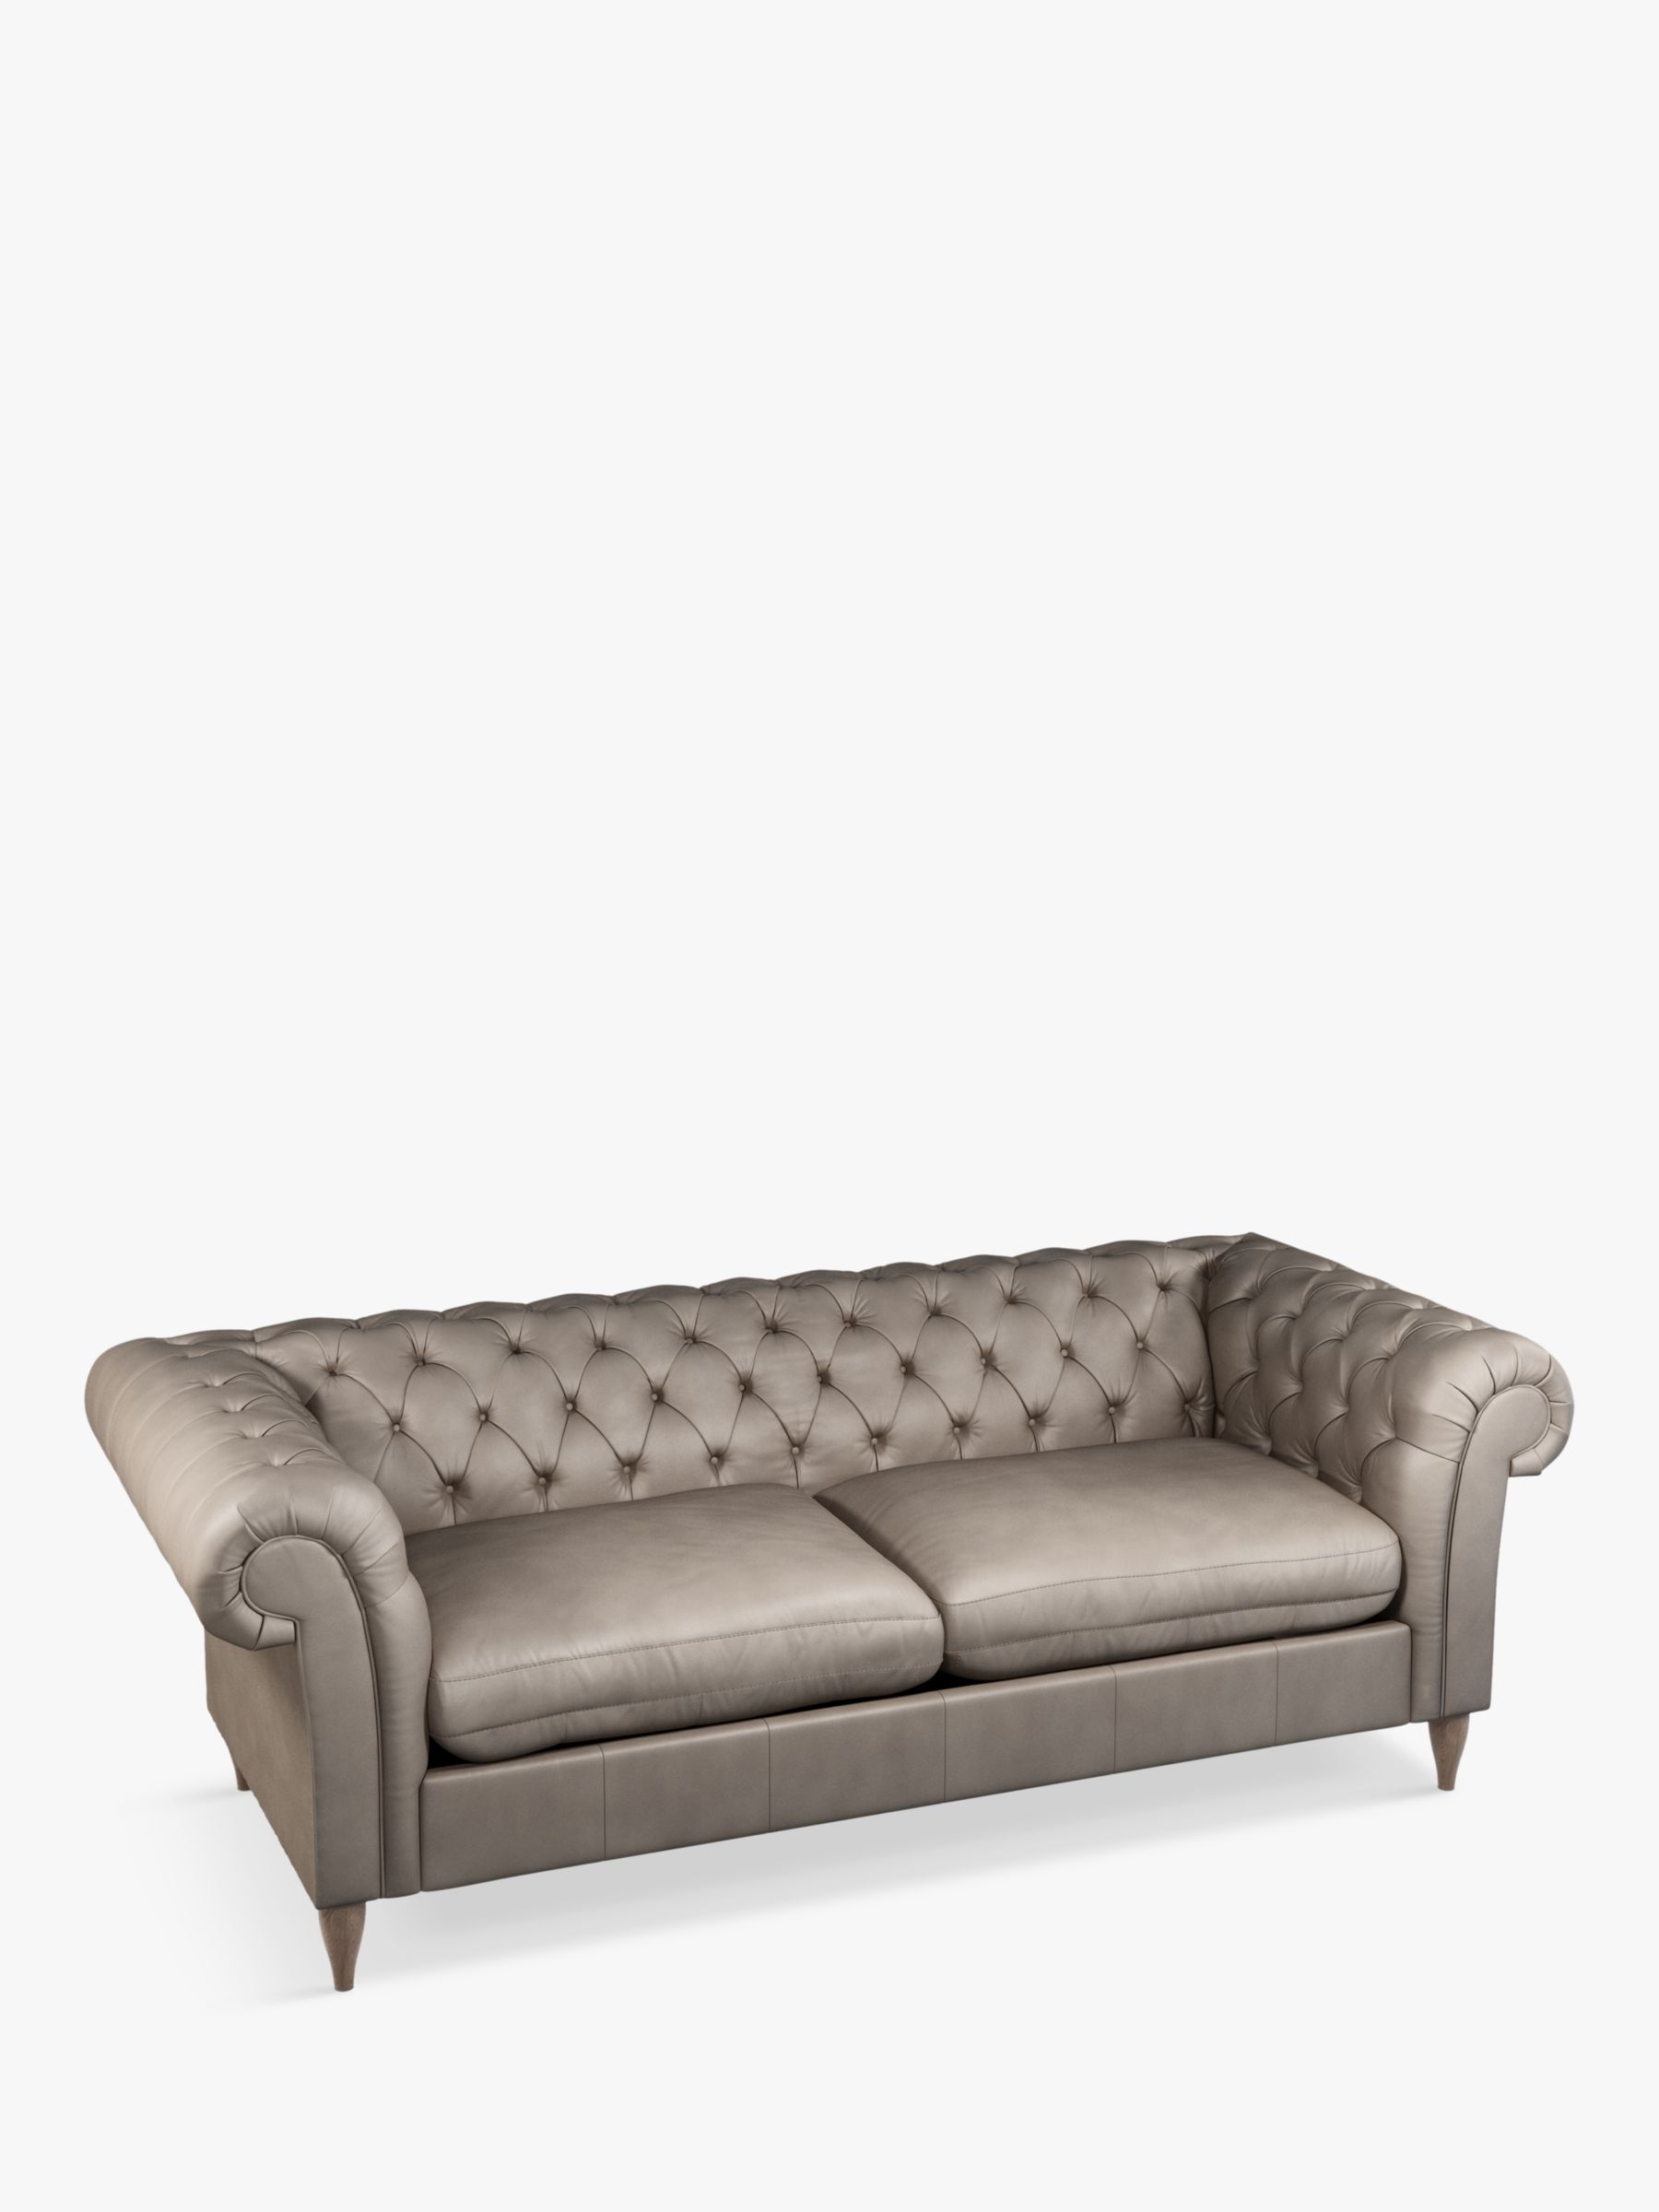 Cromwell Range, John Lewis Cromwell Chesterfield Double Leather Sofa Bed, Dark Leg, Nature Putty